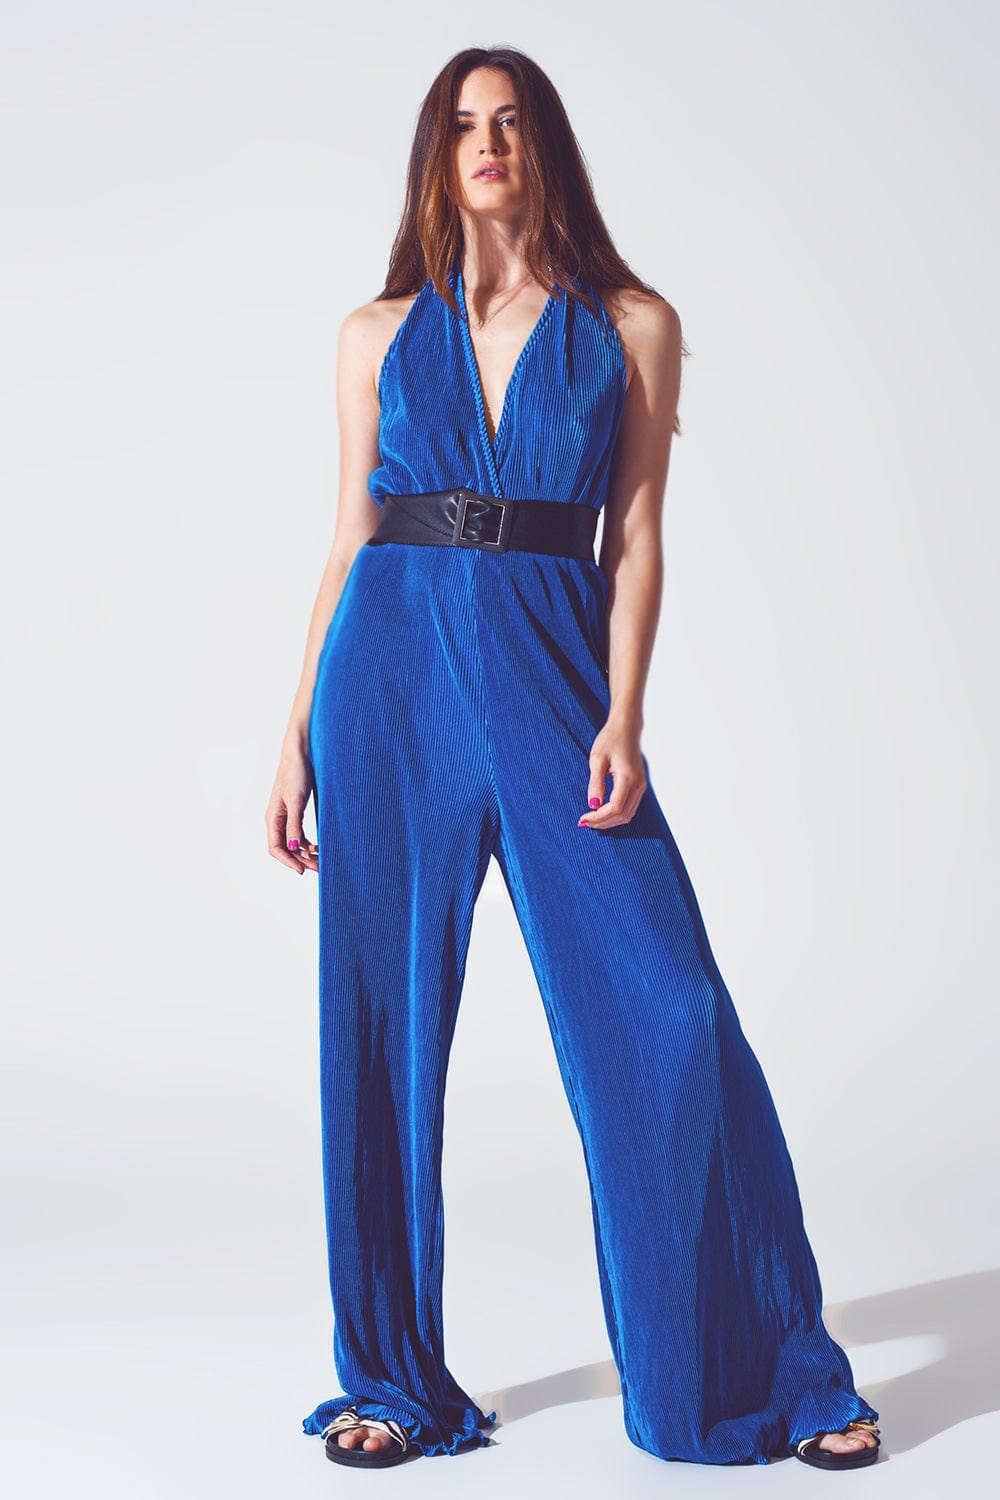 Jumpsuits & Rompers - Himelhoch's Department Store